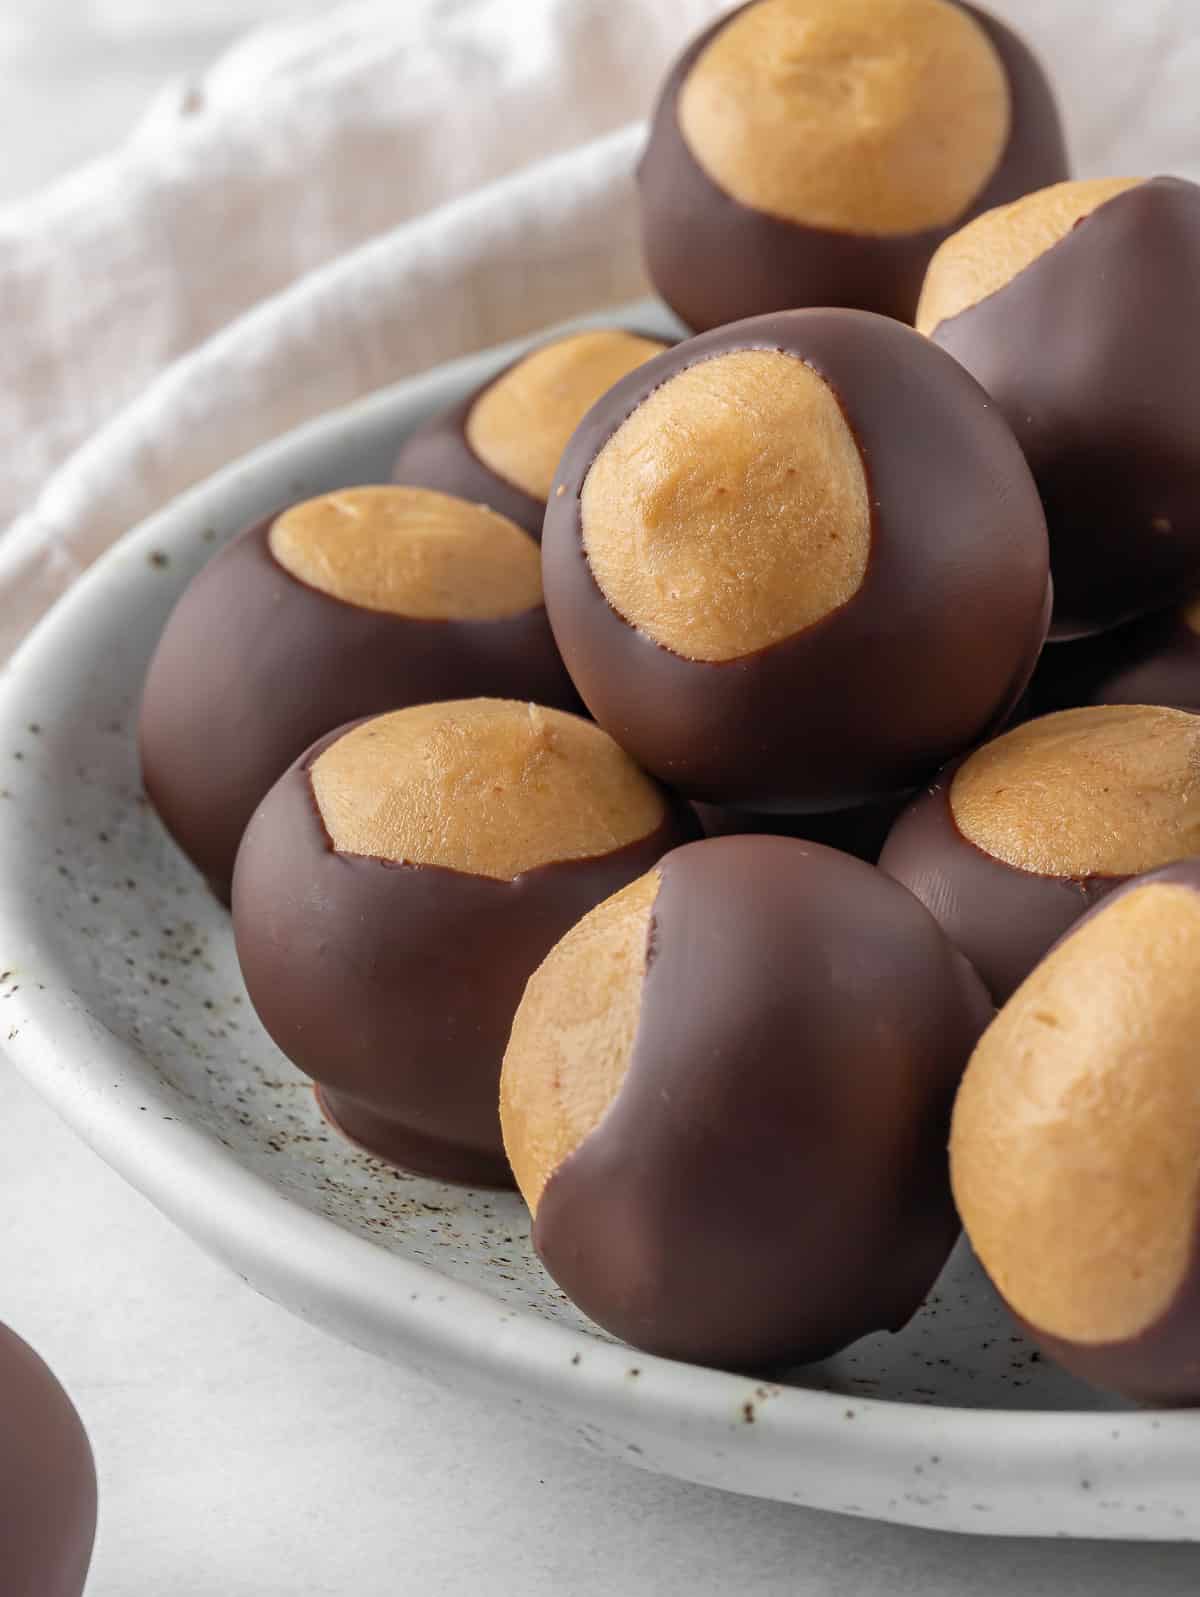 A pile of buckeye candy balls on a plate.